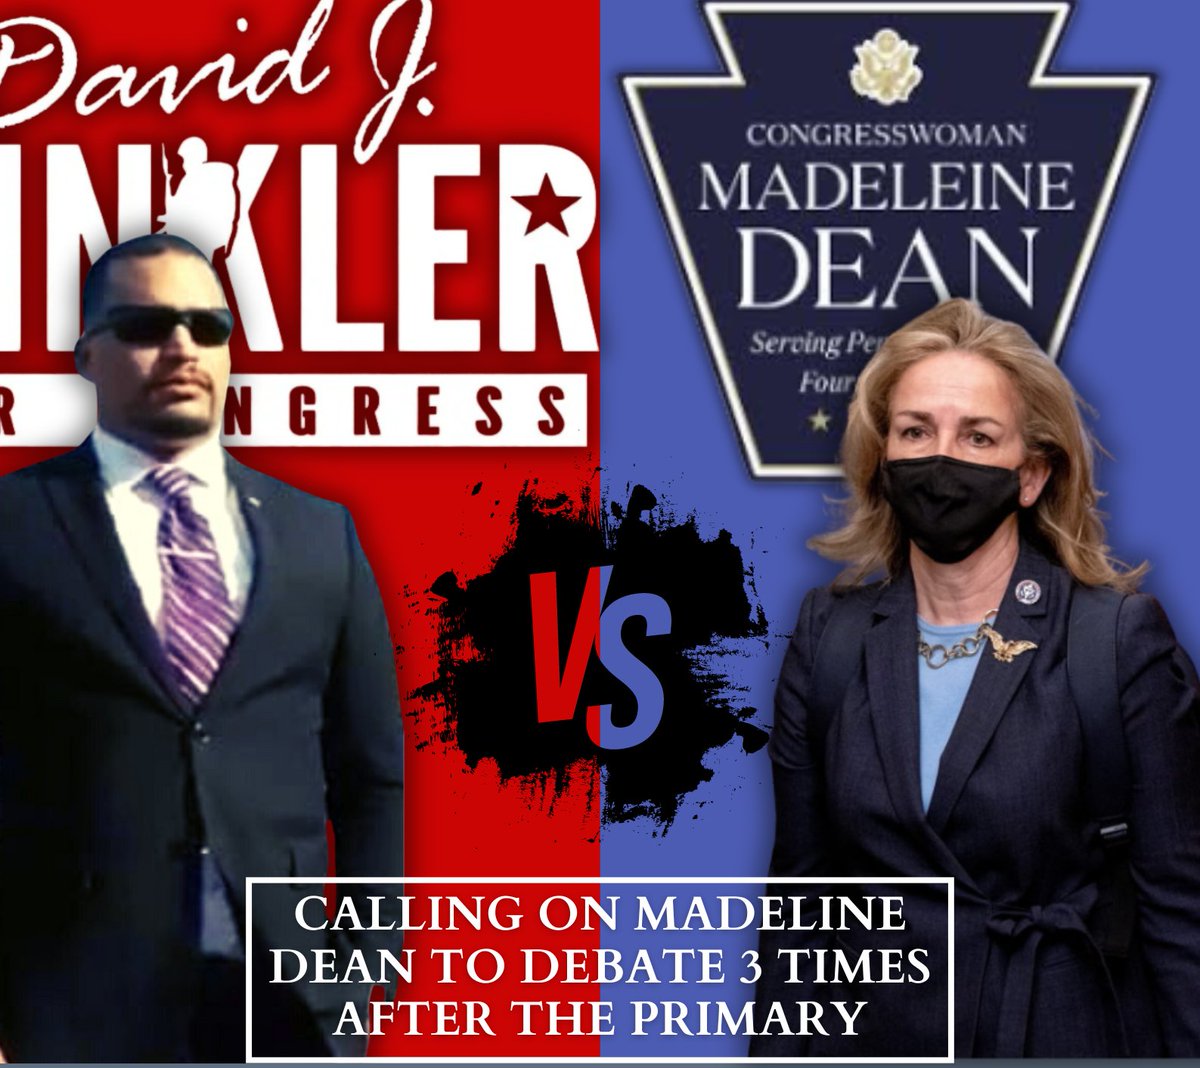 My campaign is calling on Madeline Dean to debate 3 times after the primary, she can choose the time & place. @RepDean both Montgomery & Berks County voters deserve to hear from both of us together in debates. If you truly believe in the Constitutional process of a free & fair…